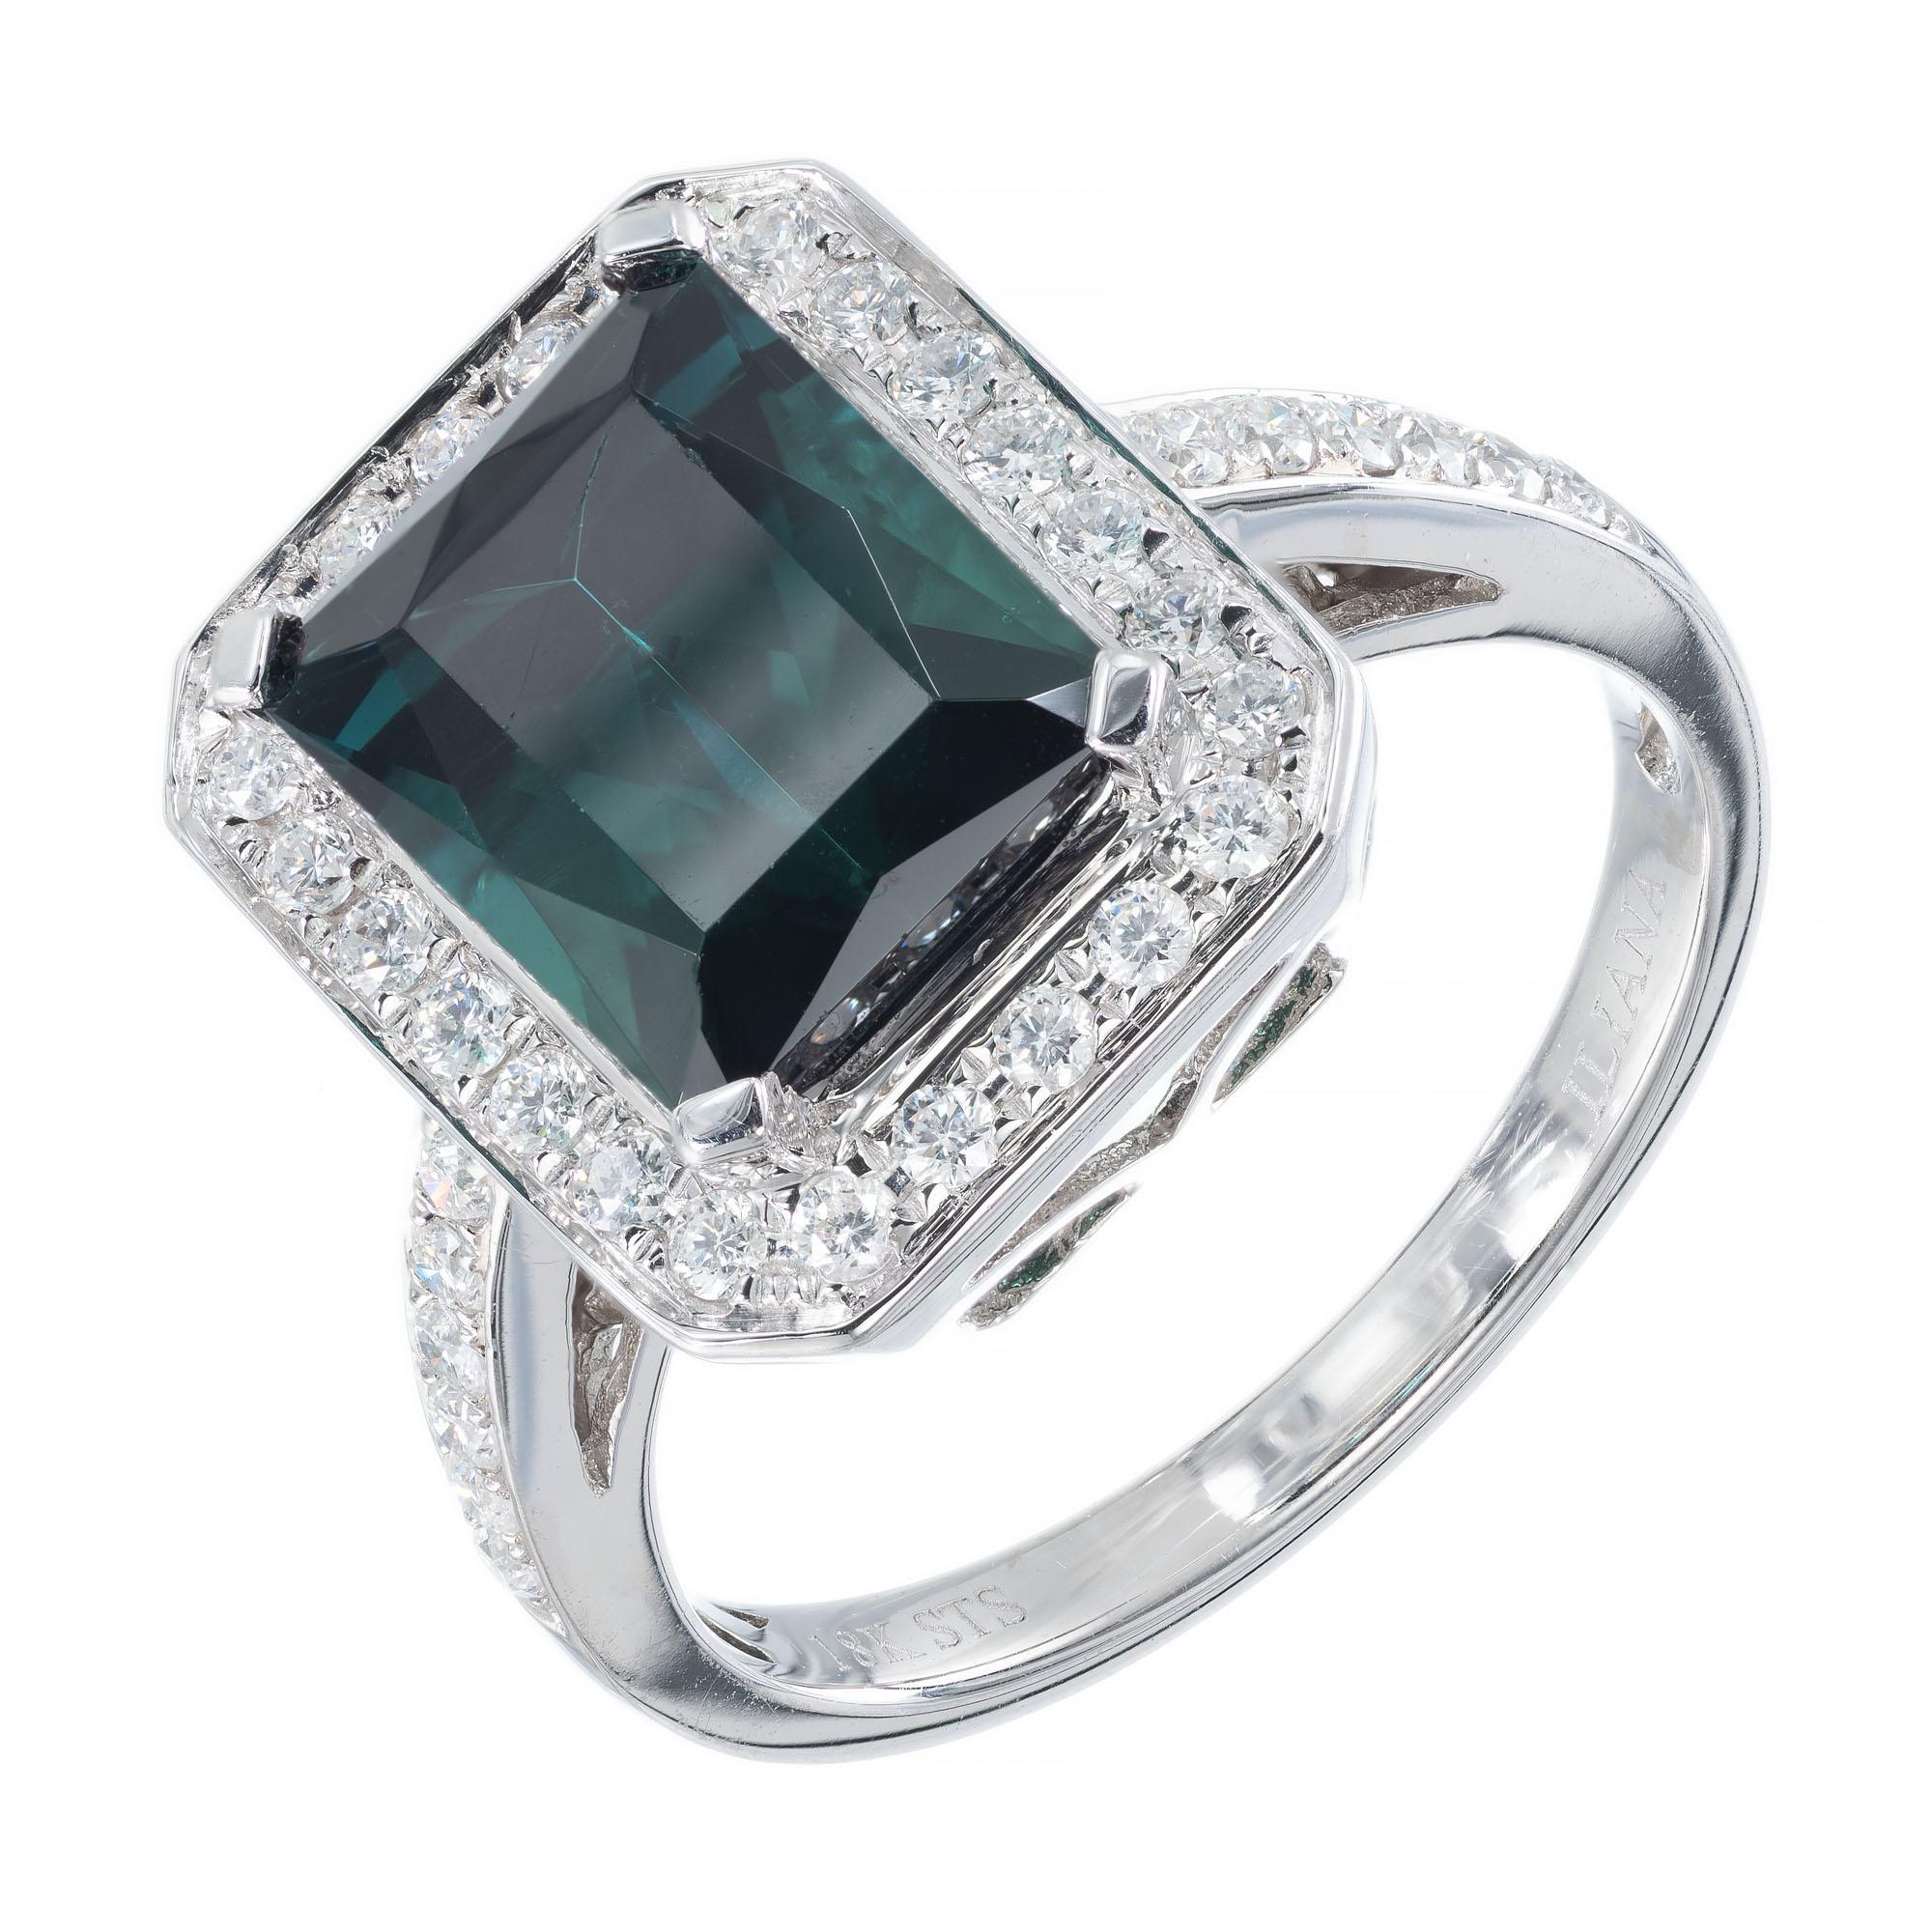 Tourmaline and diamond halo engagement ring. 3.65 carat emerald cut center stone with 36 full cut accent diamonds in a 18k white gold setting. 

1 fine bright green Emerald cut Tourmaline, approx. total weight 3.65cts, 10 x 8.1mm
36 full cut